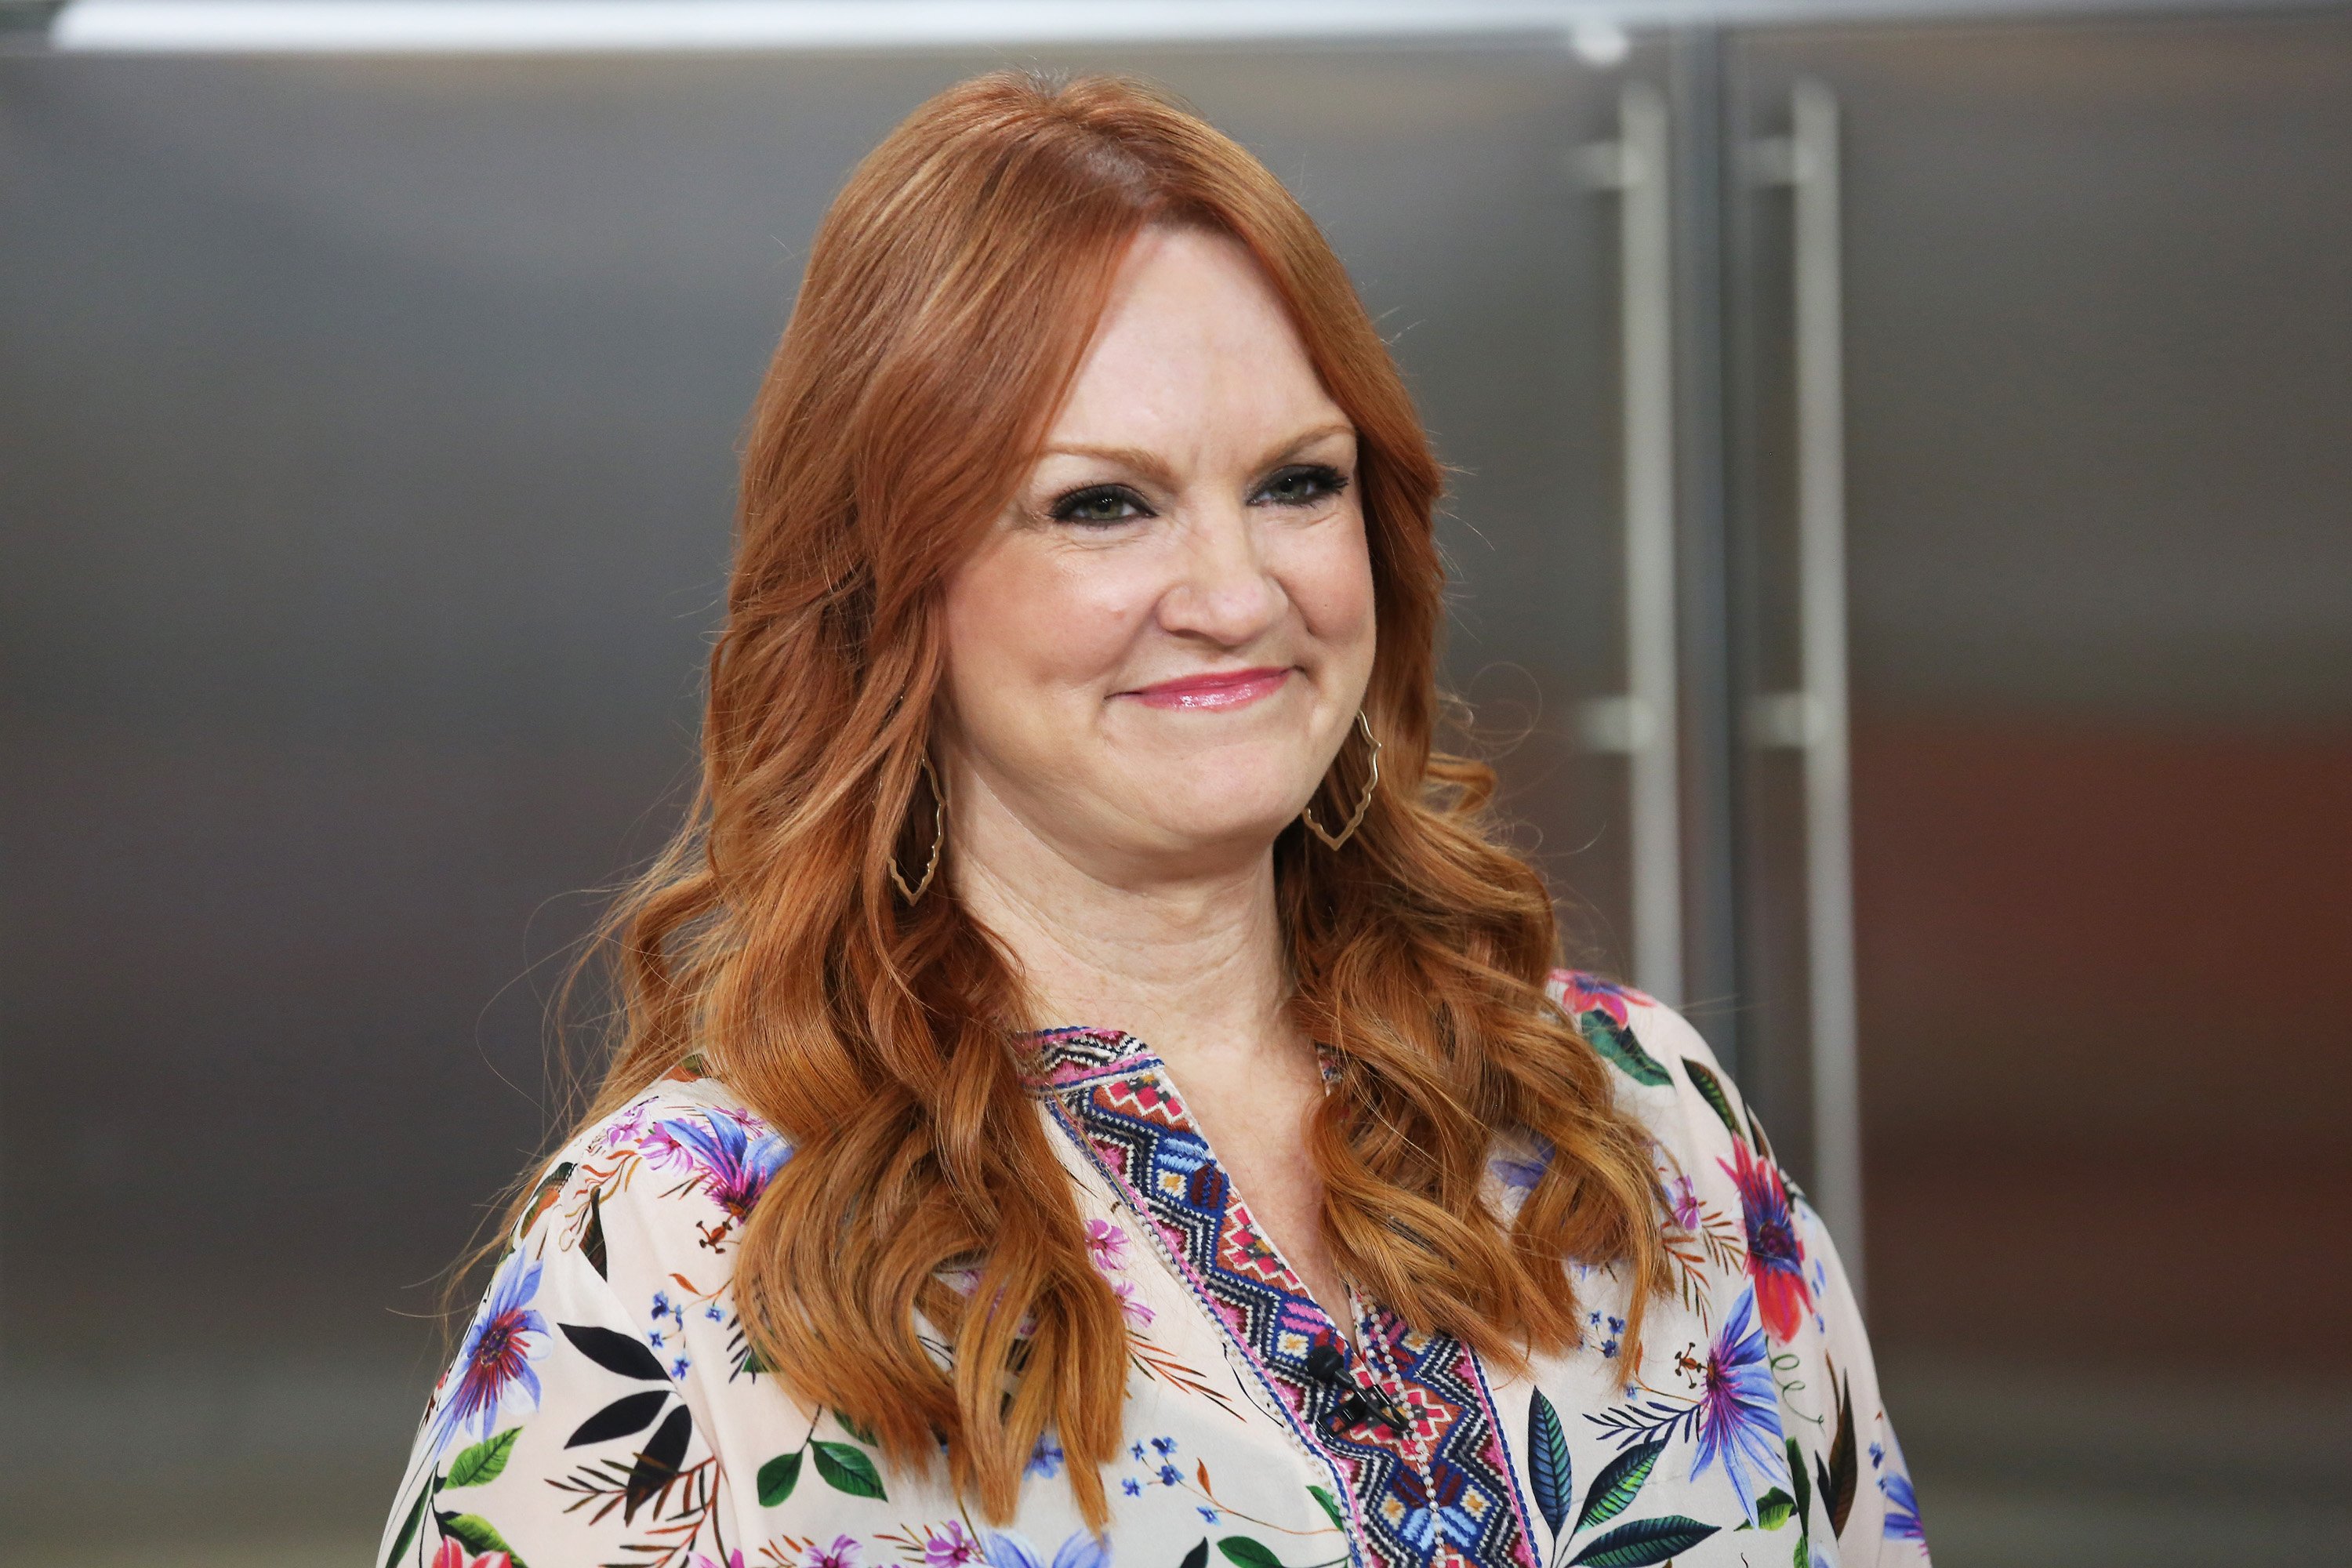 Ree Drummond on Tuesday October 22, 2019 | Source: Getty Images